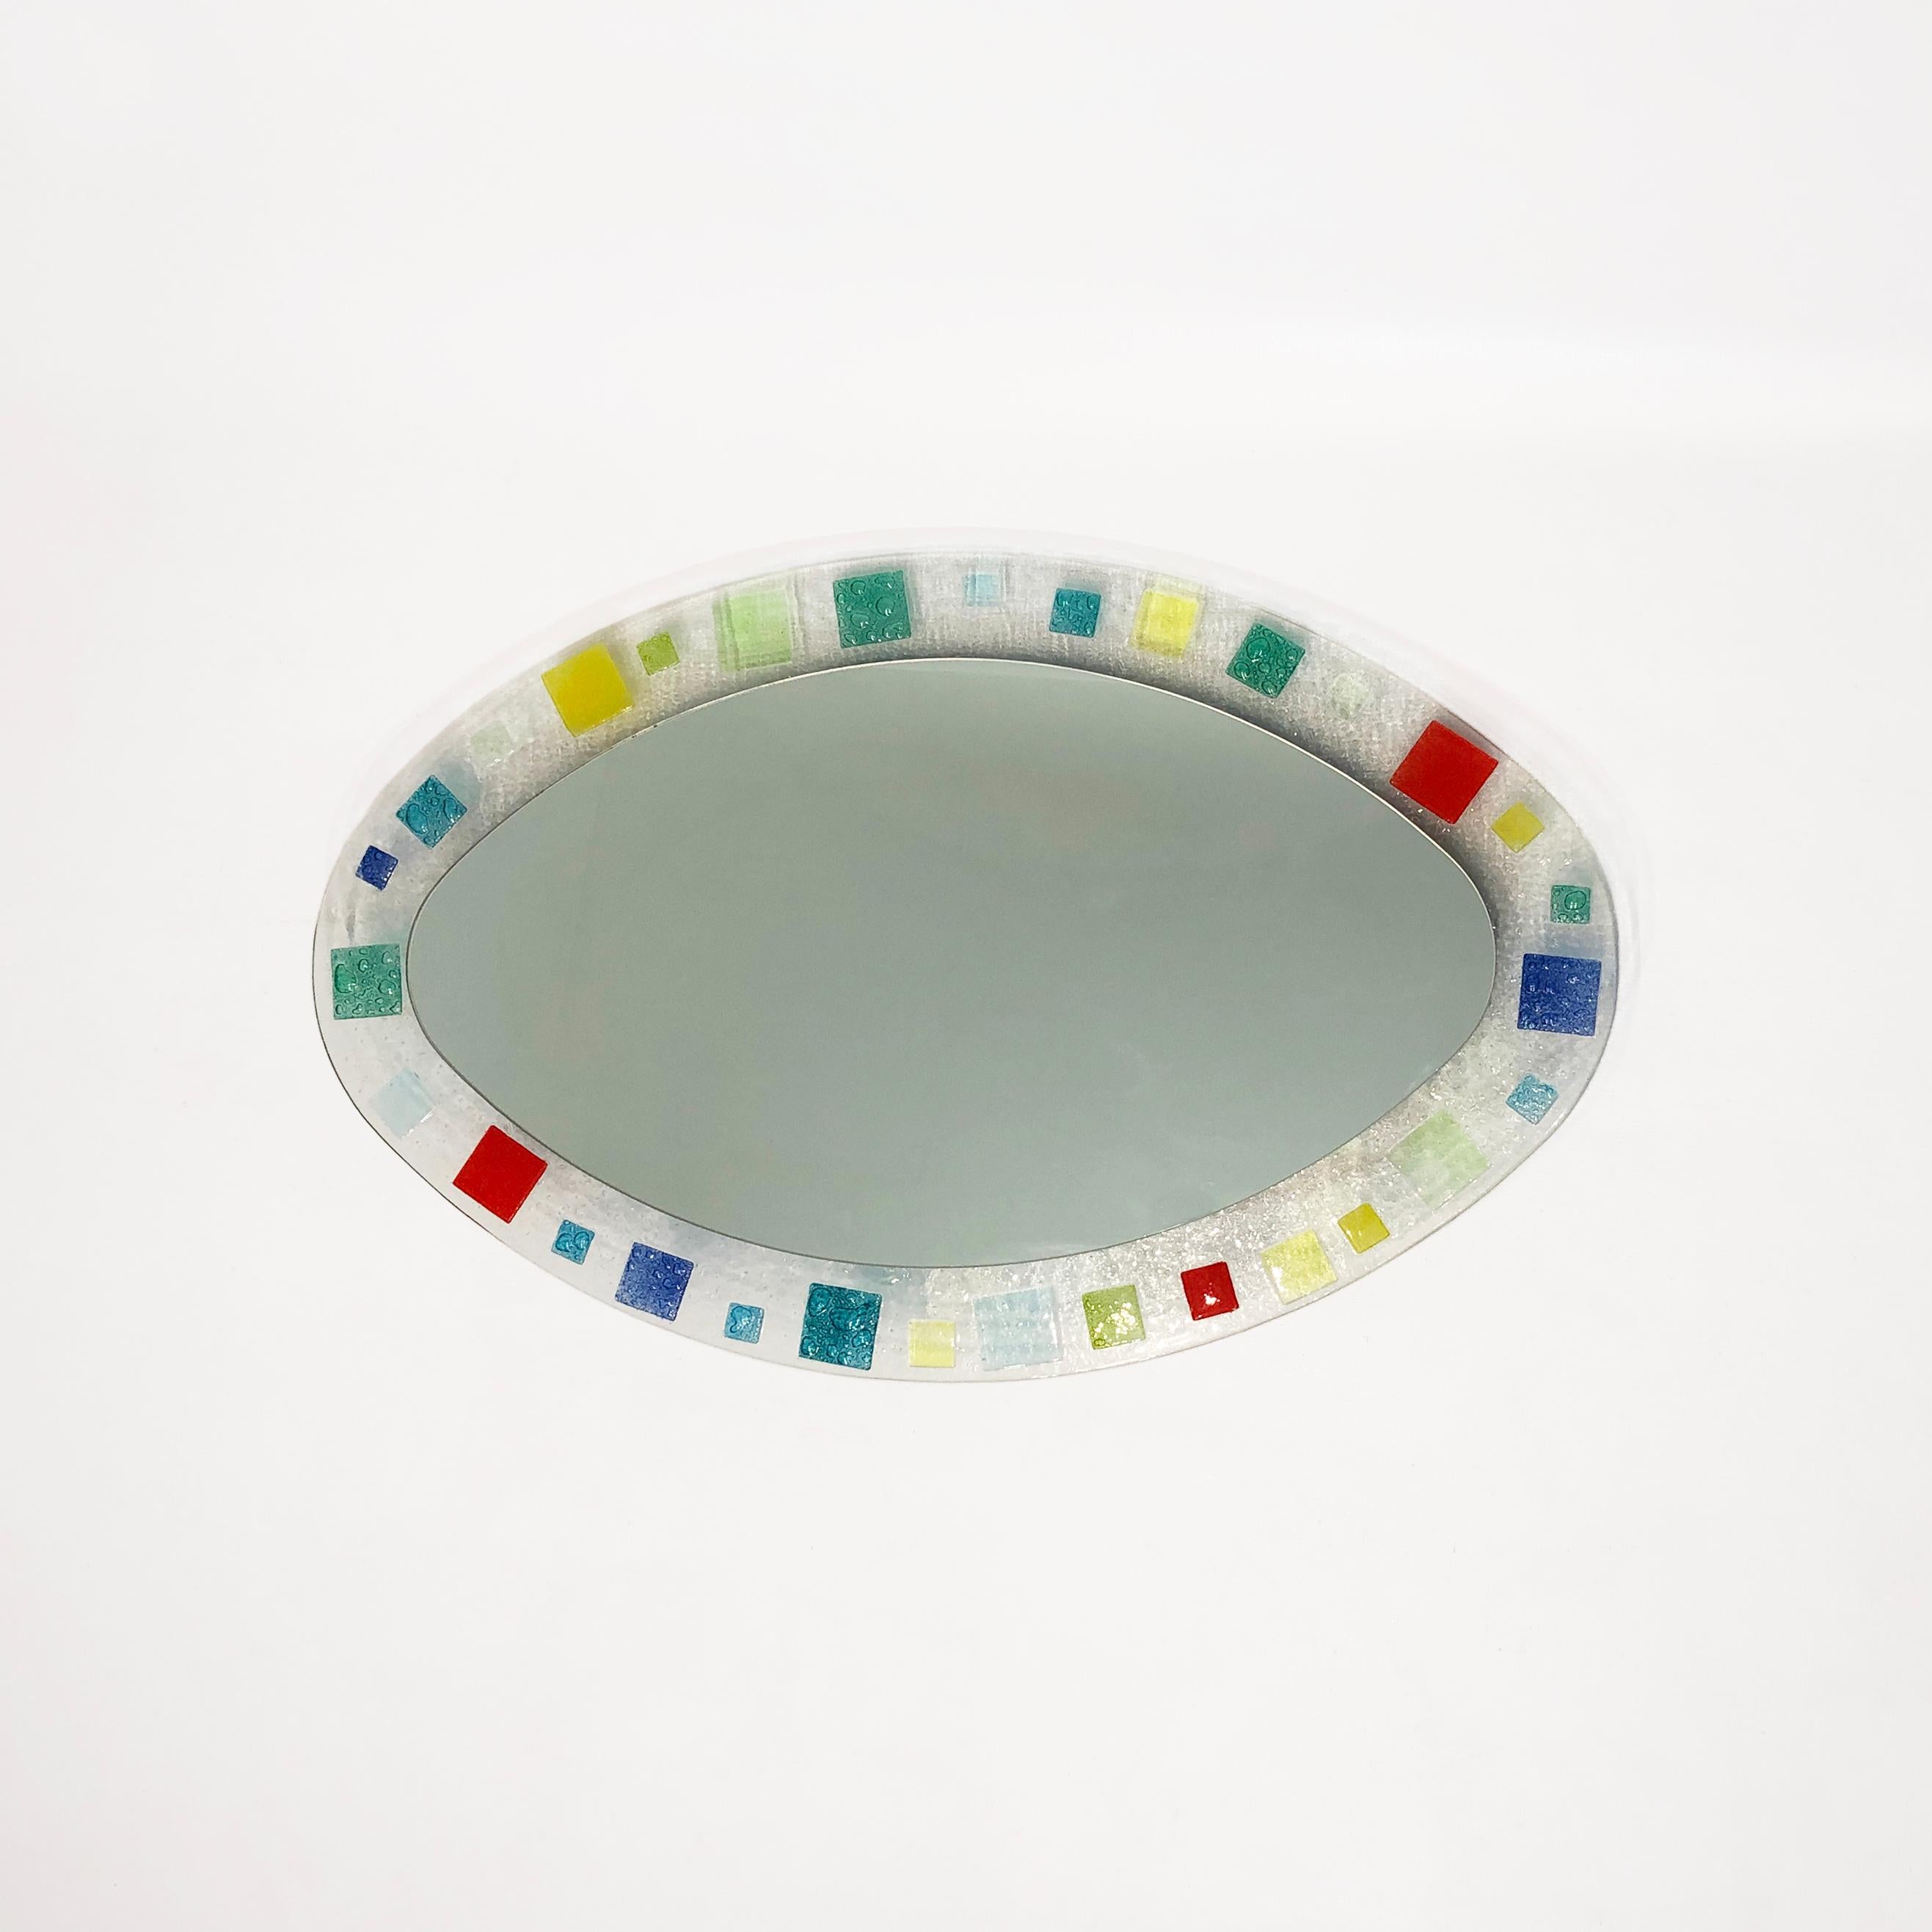 This small oval-shaped mirror, set in a hand-blown Murano glass frame and backed by veneered wood, would make a perfect edition in both maximalist or minimalist rooms.. The vibrant reds, greens, and blues of the Italian glass edges draw the eye to